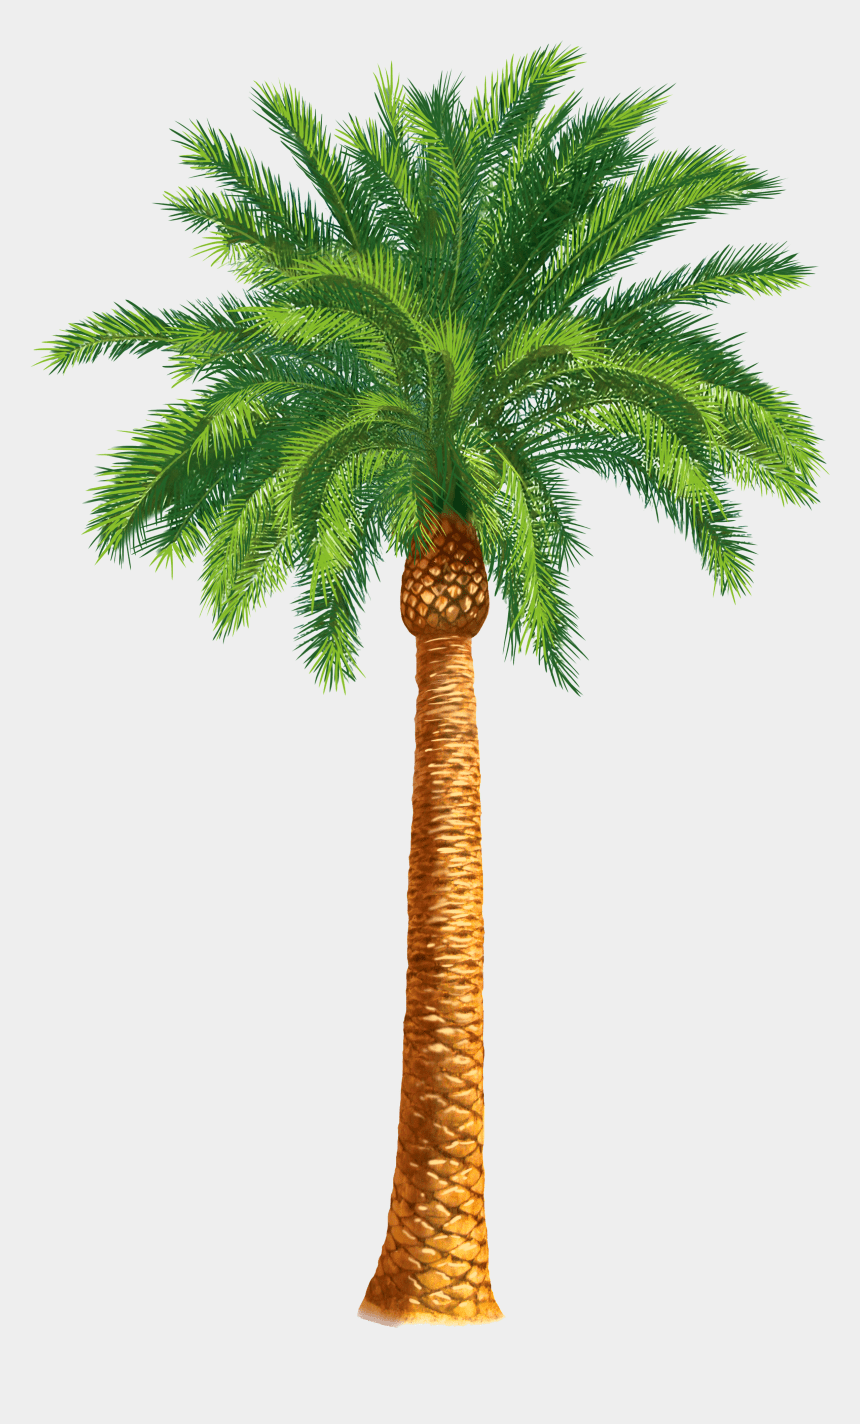 Palm Tree Drawing & Illustration Ideas How To Draw Palm Tree